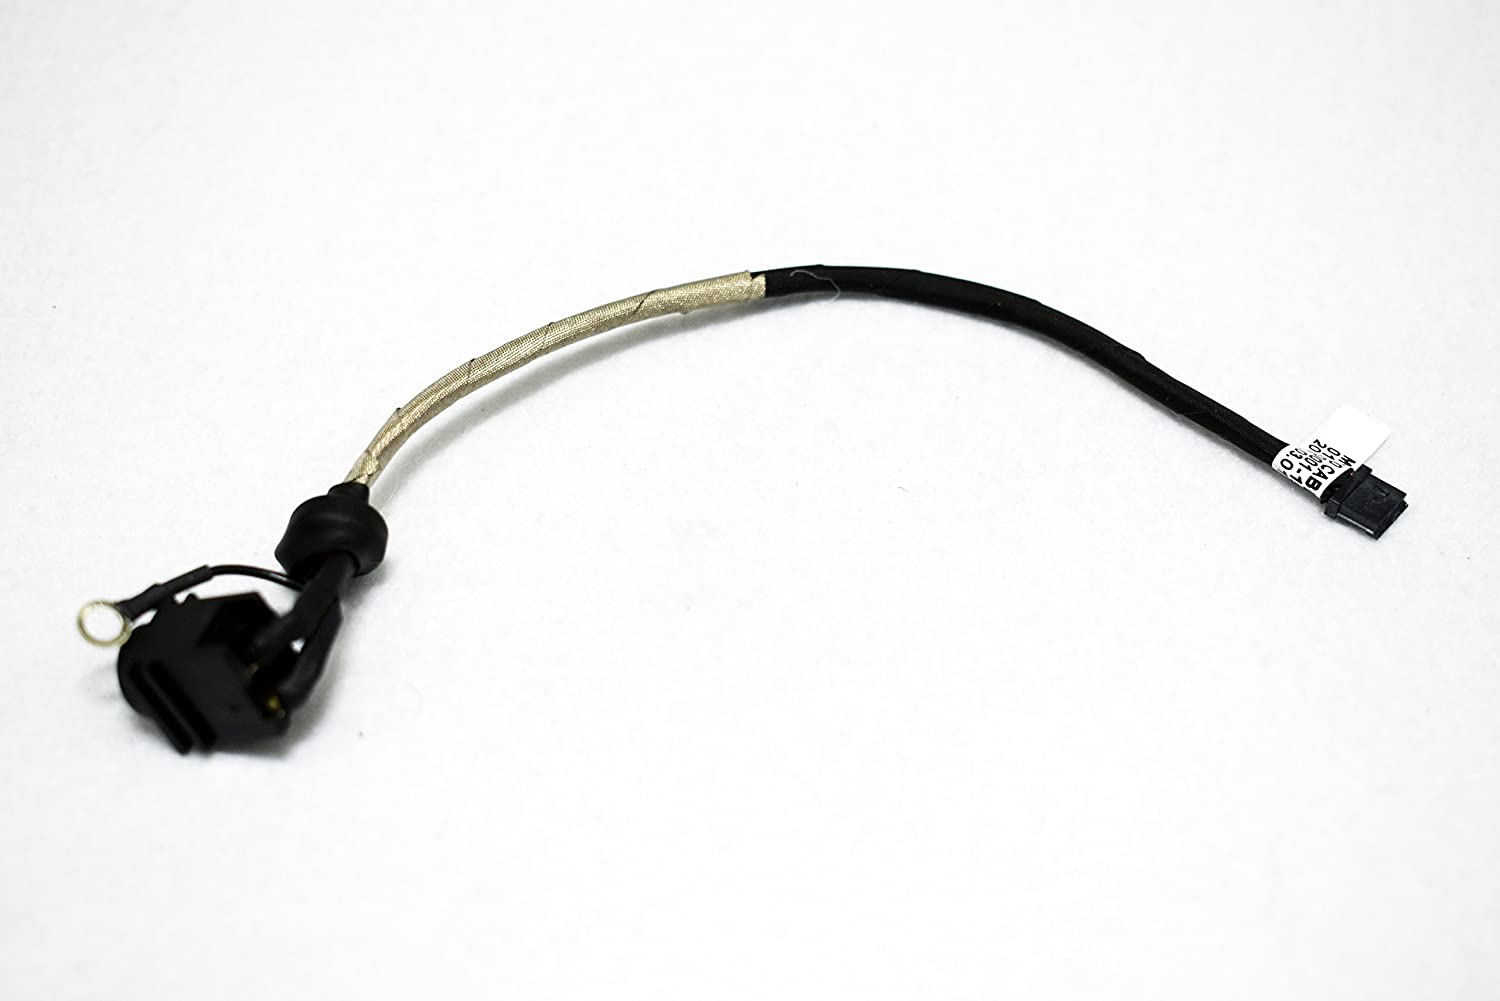 Power Jack Port Socket Cable Harness For Sony Vaio sale in Trinidad